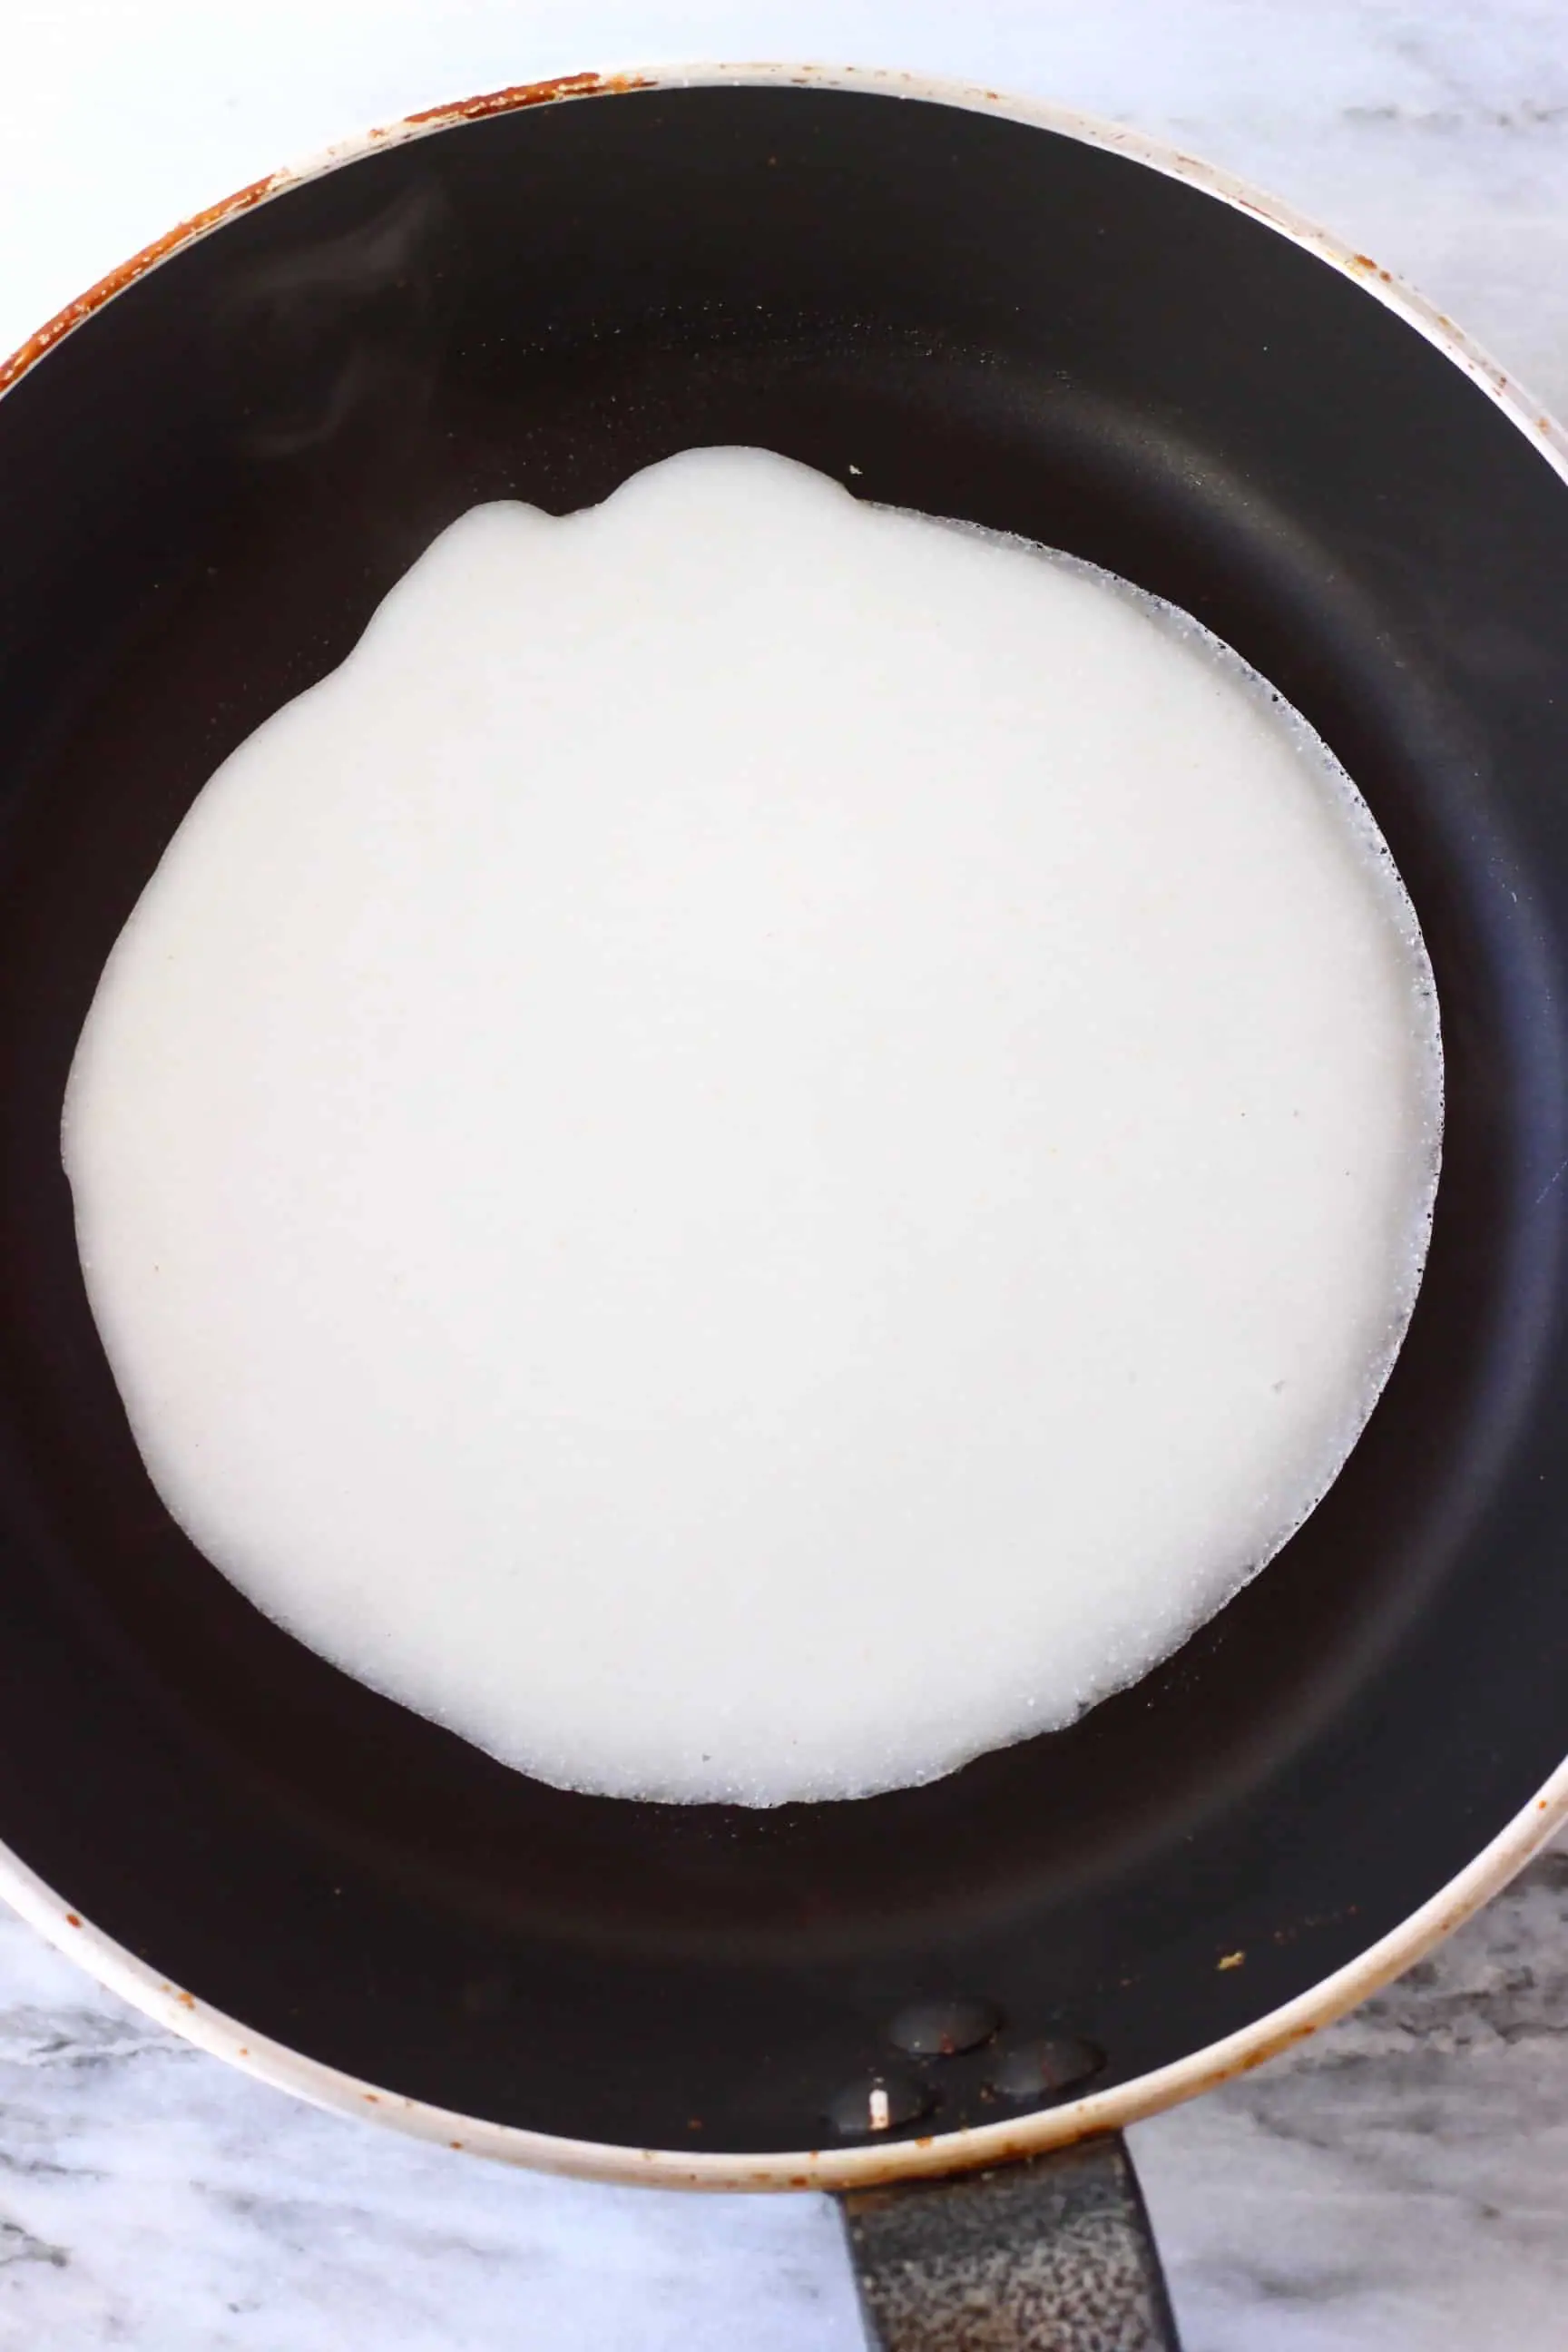 A round gluten-free vegan crepe being fried in a black frying pan 